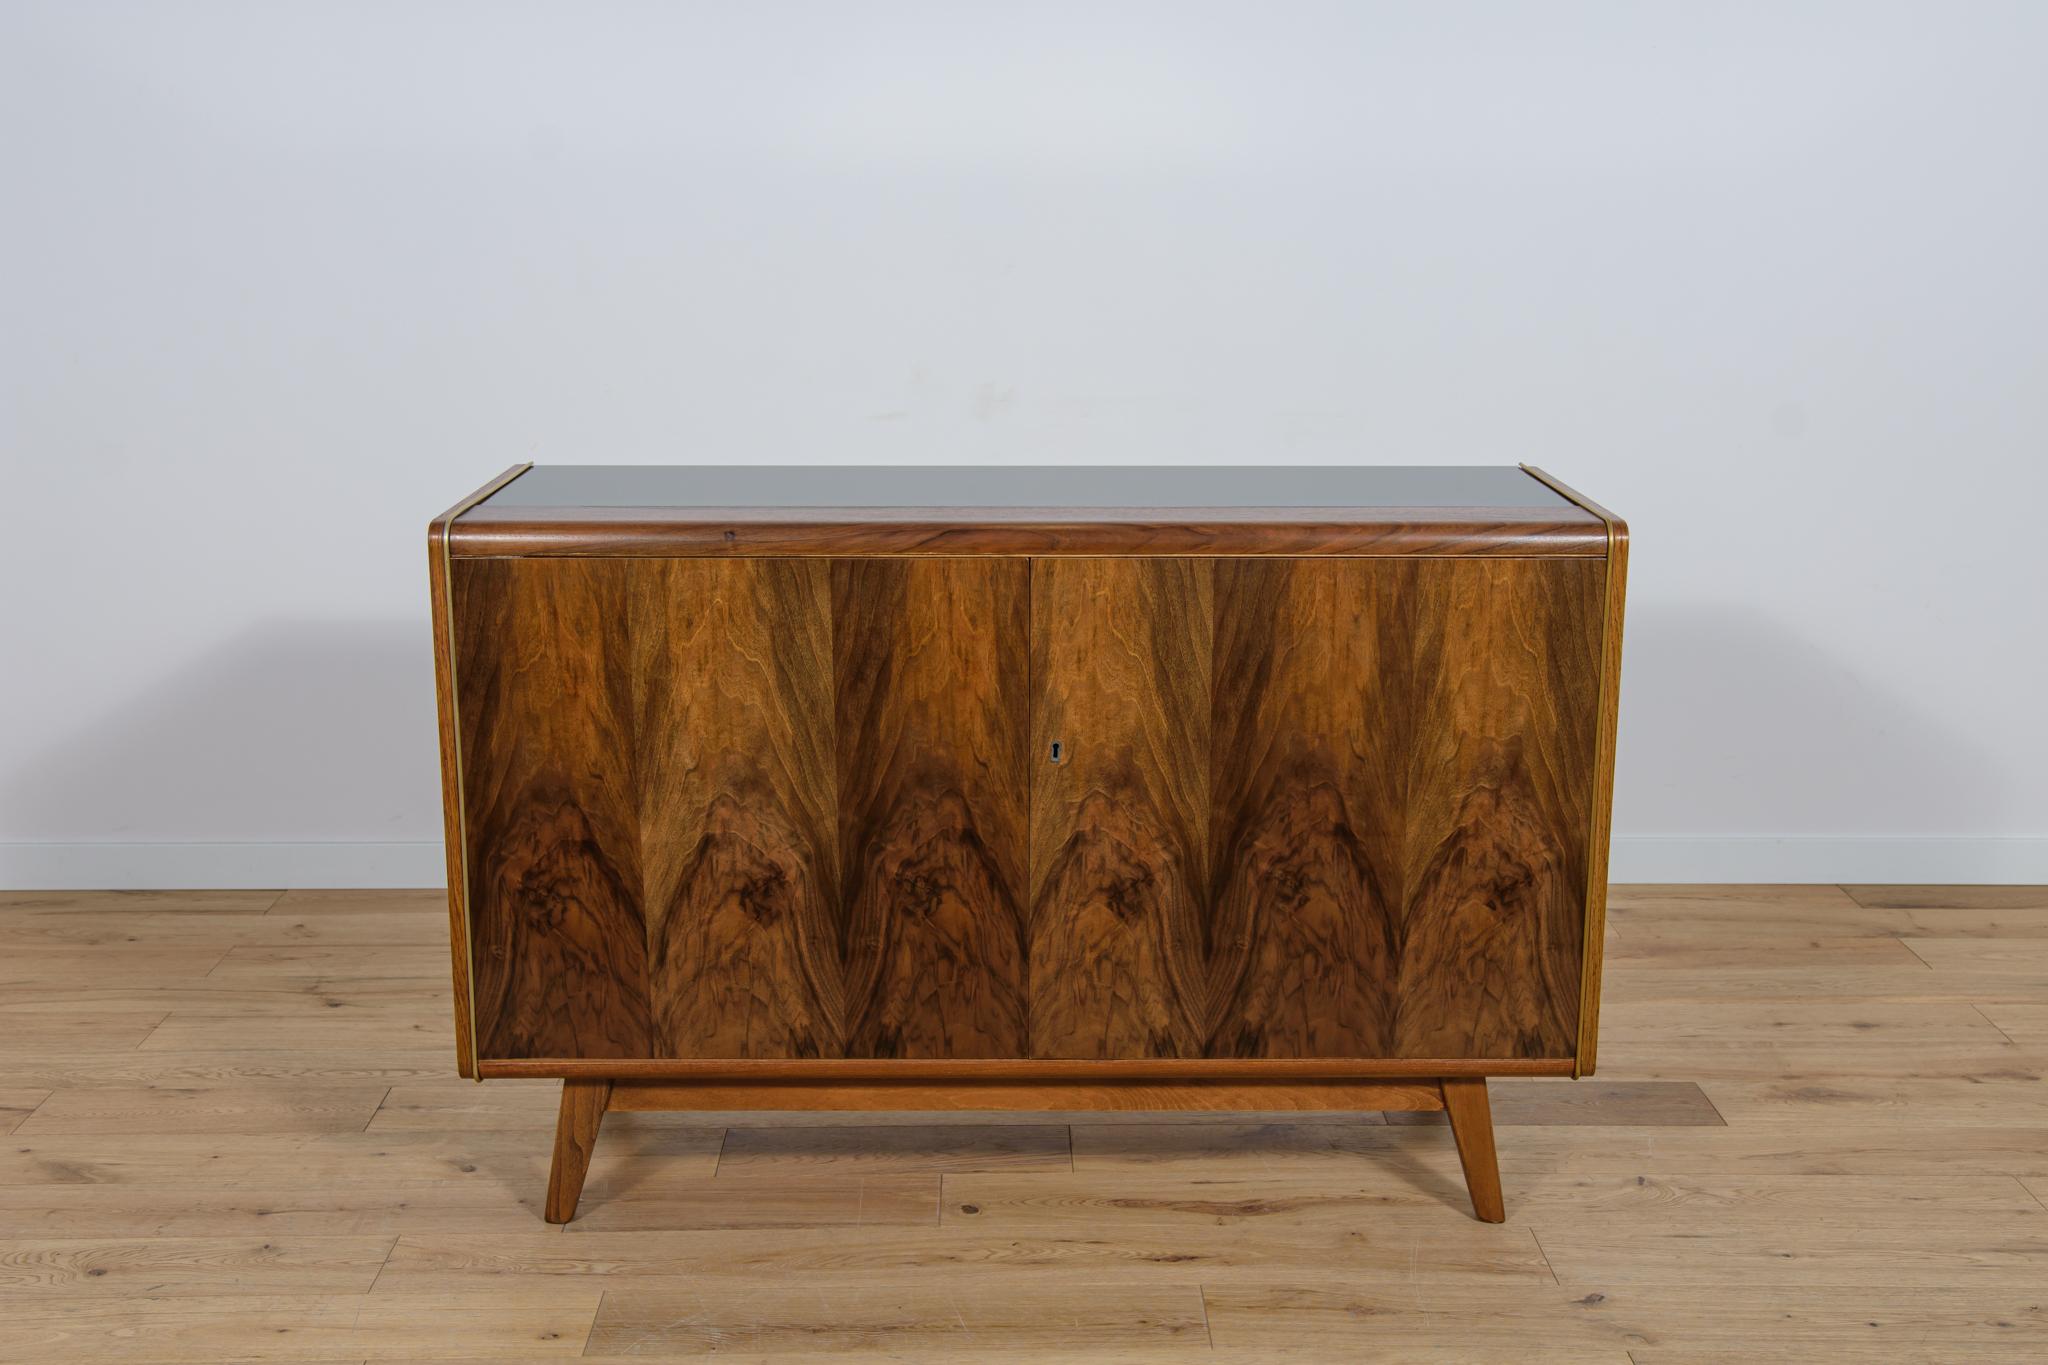 The small sideboard was designed by Bohumil Landsman and Hubert Nepozitek in the 1960s. It was manufactured by the Jitona Soběslav furniture factory in Czechoslovakia. A sideboard made of beech wood, veneered with walnut (front and top) and oak